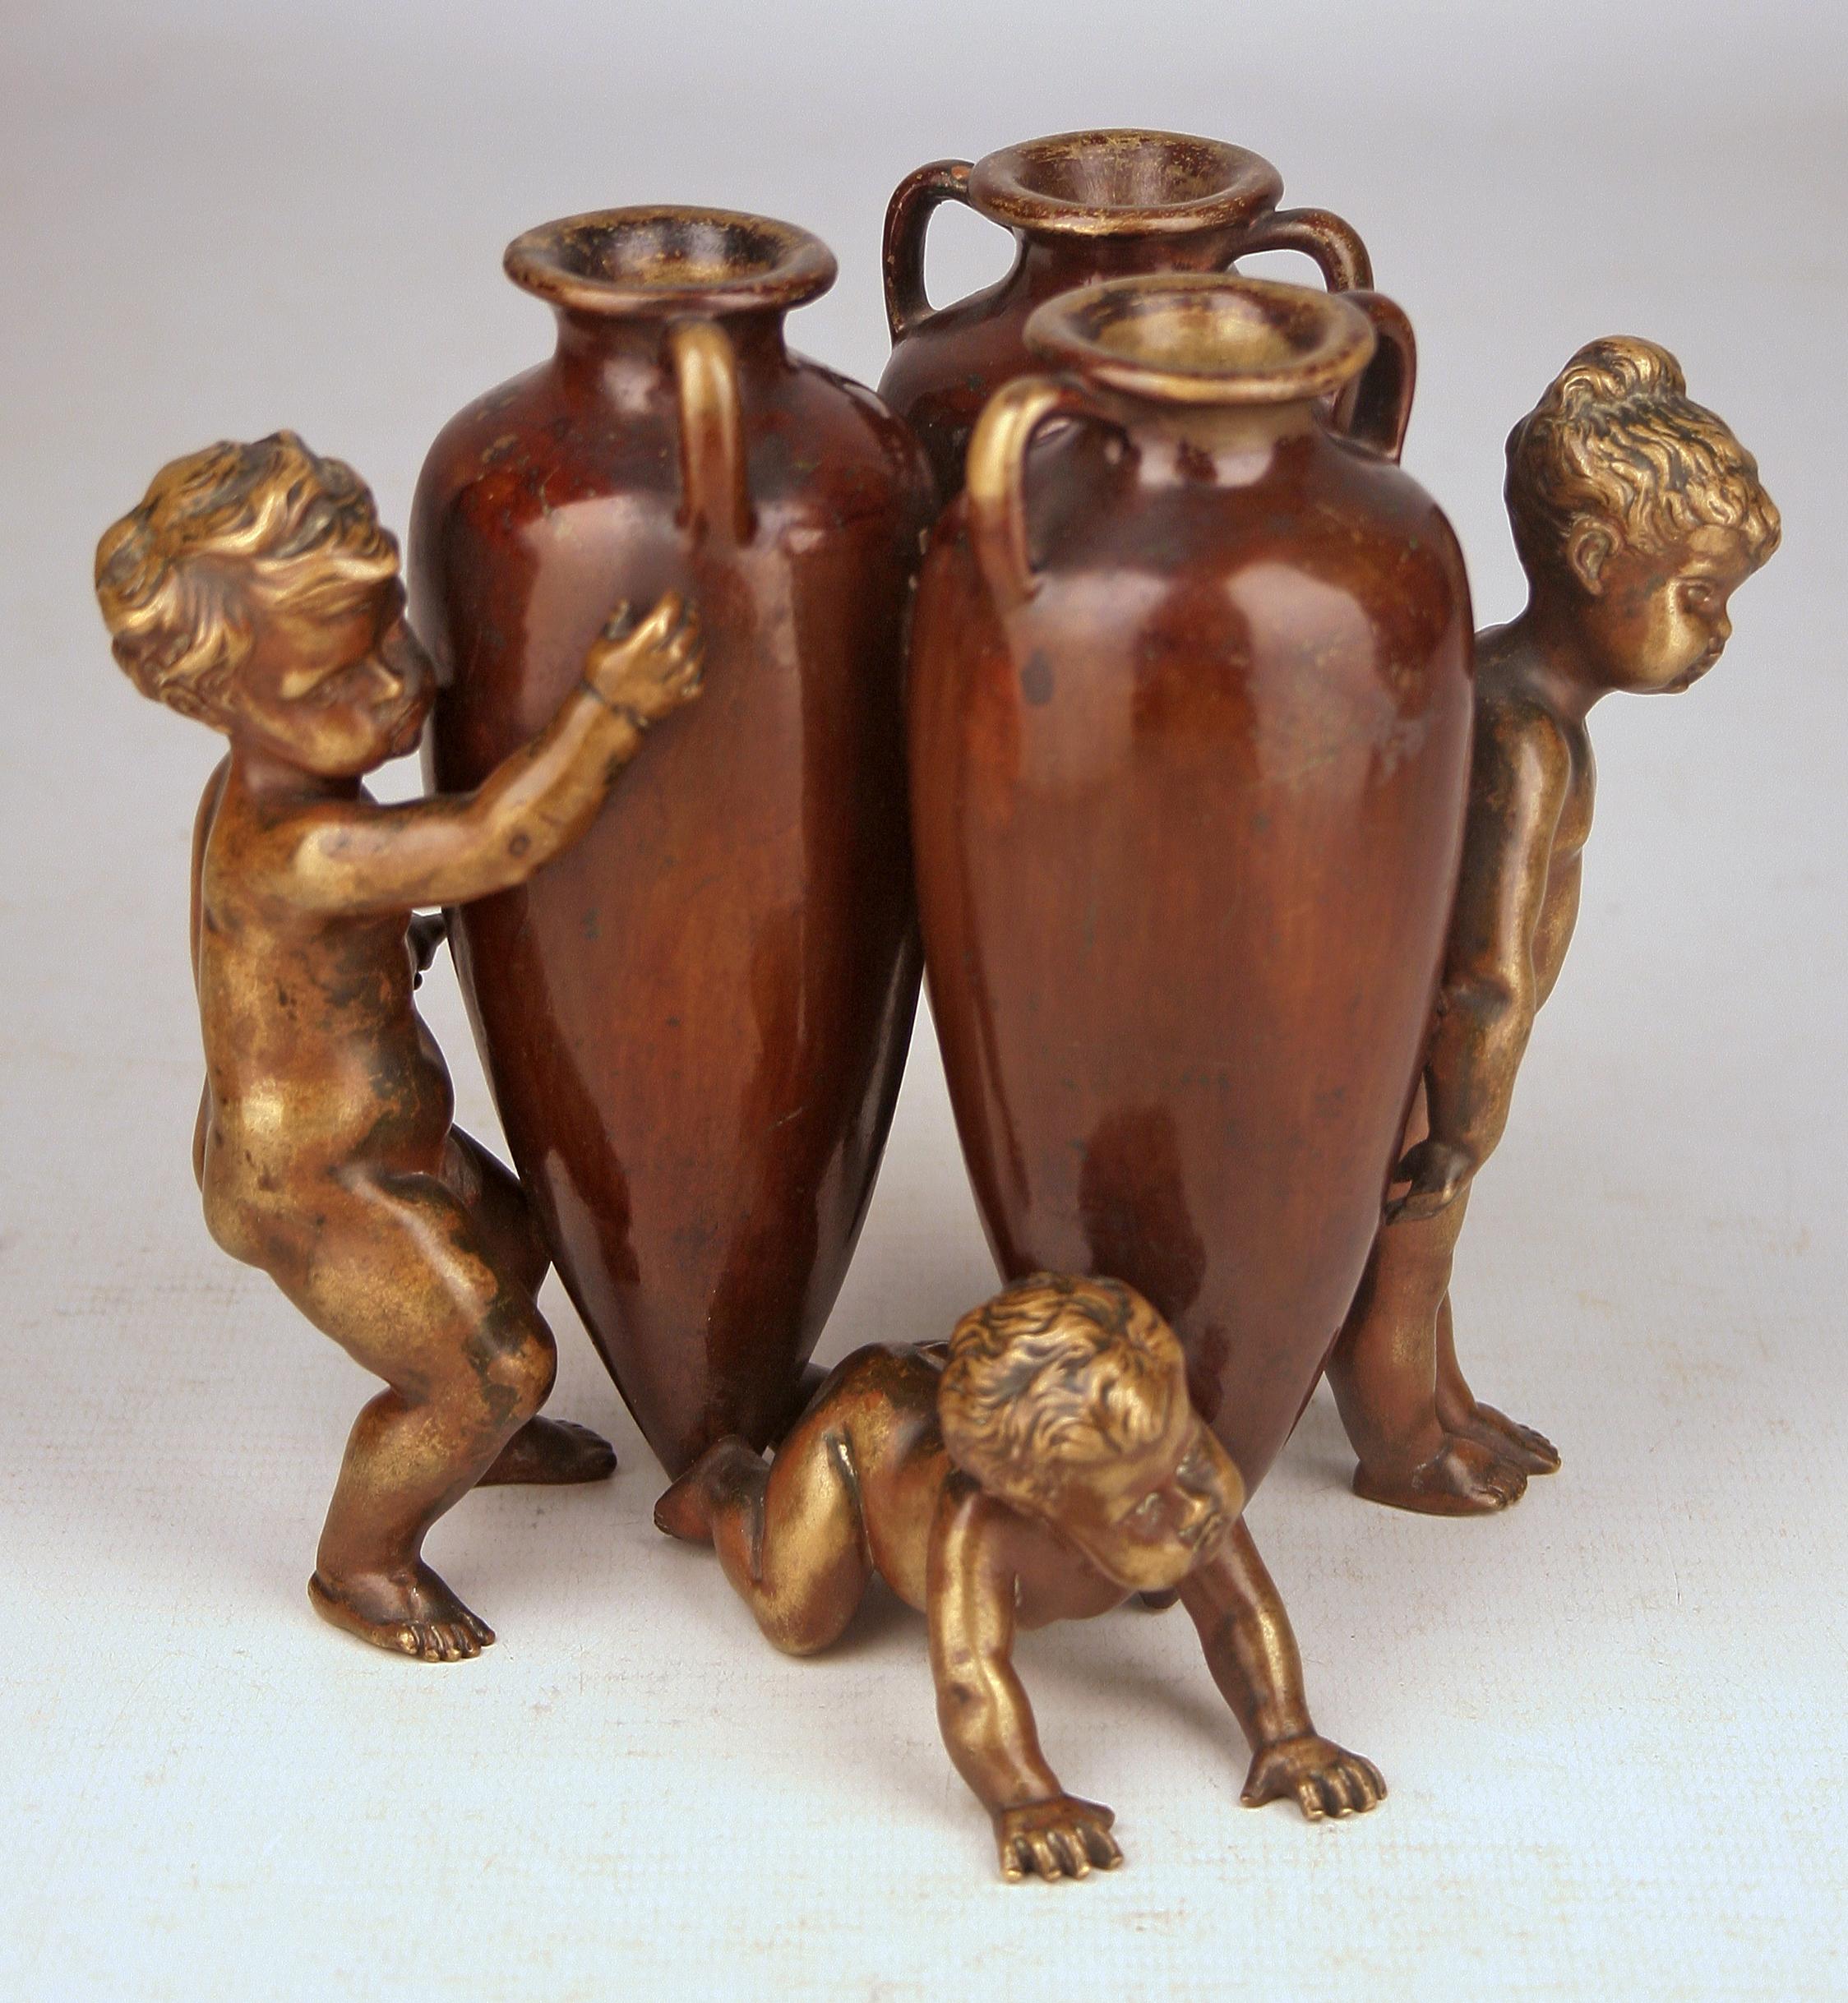 Molded French Empire Patinated Bronze Sculpture of Boys and Amphoras by Auguste Moreau For Sale